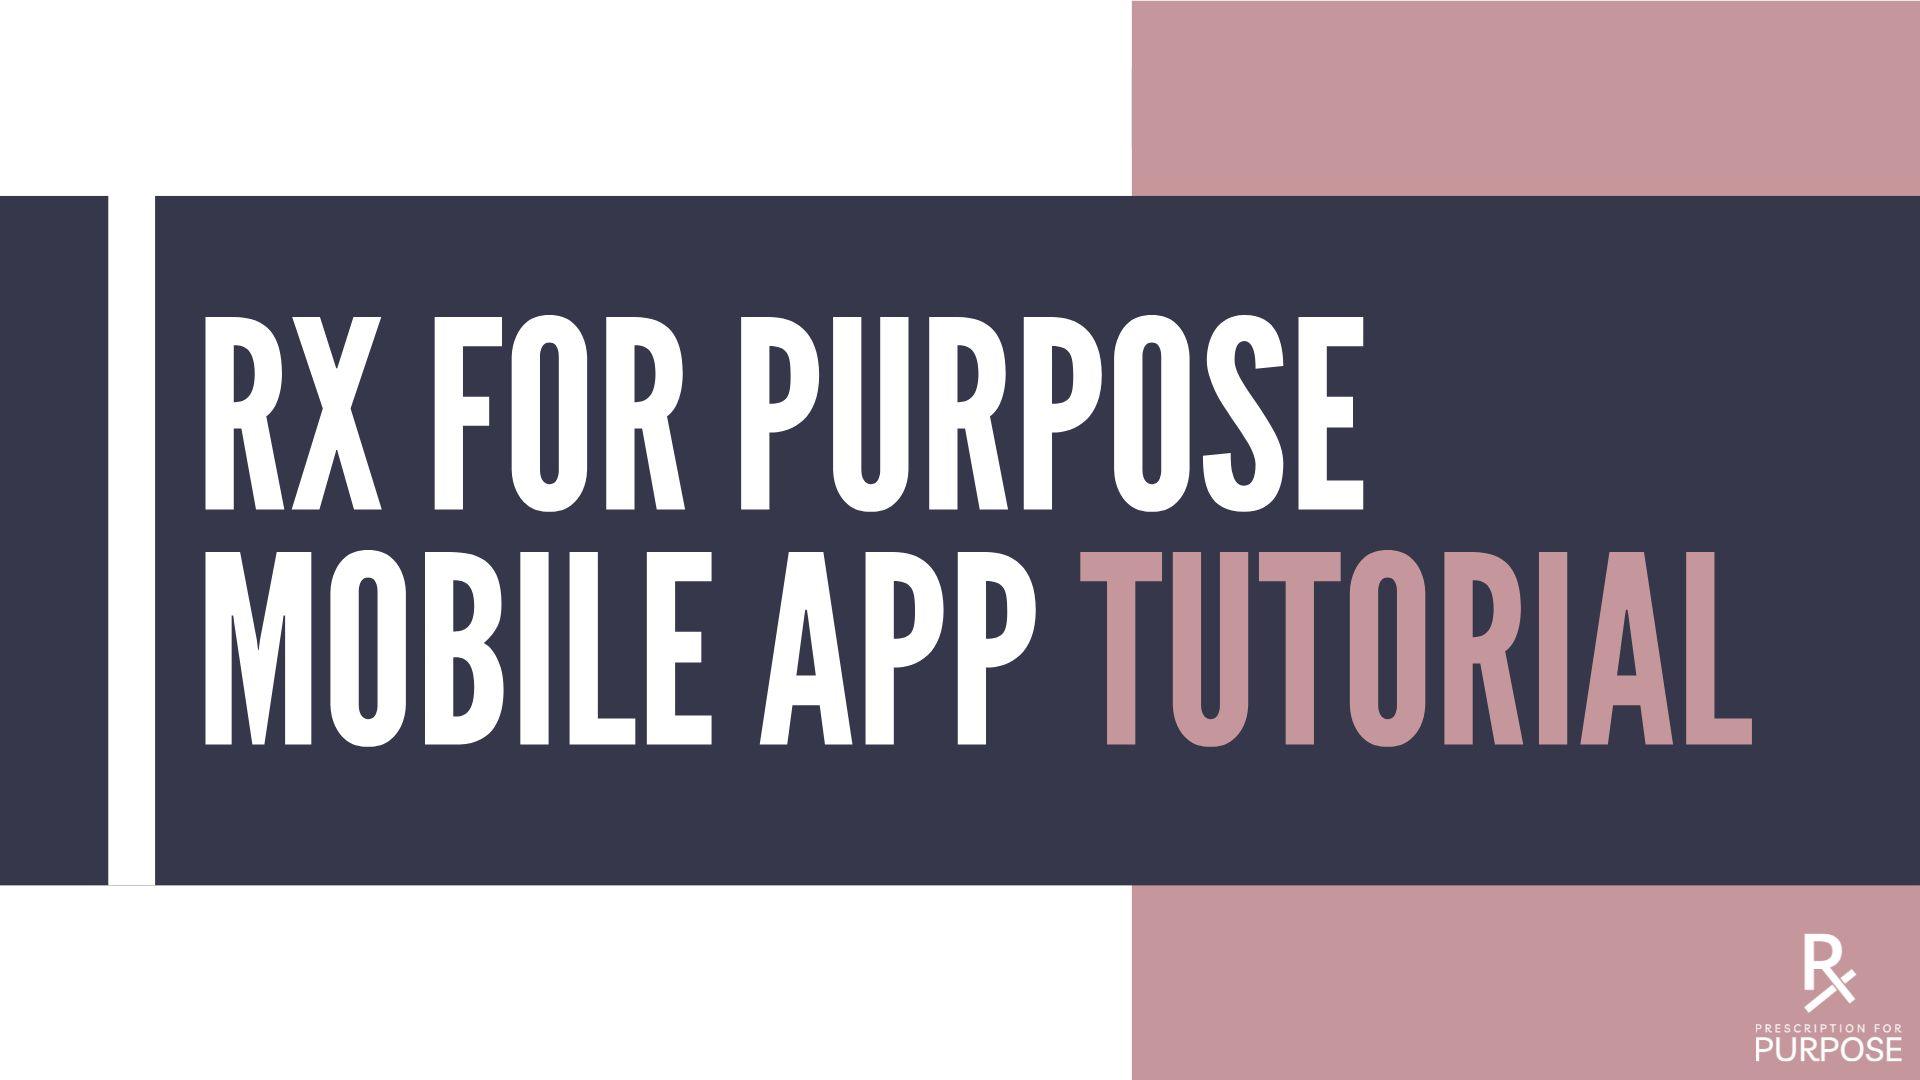 Watch The App Tutorial + Sign Up For The Community Access